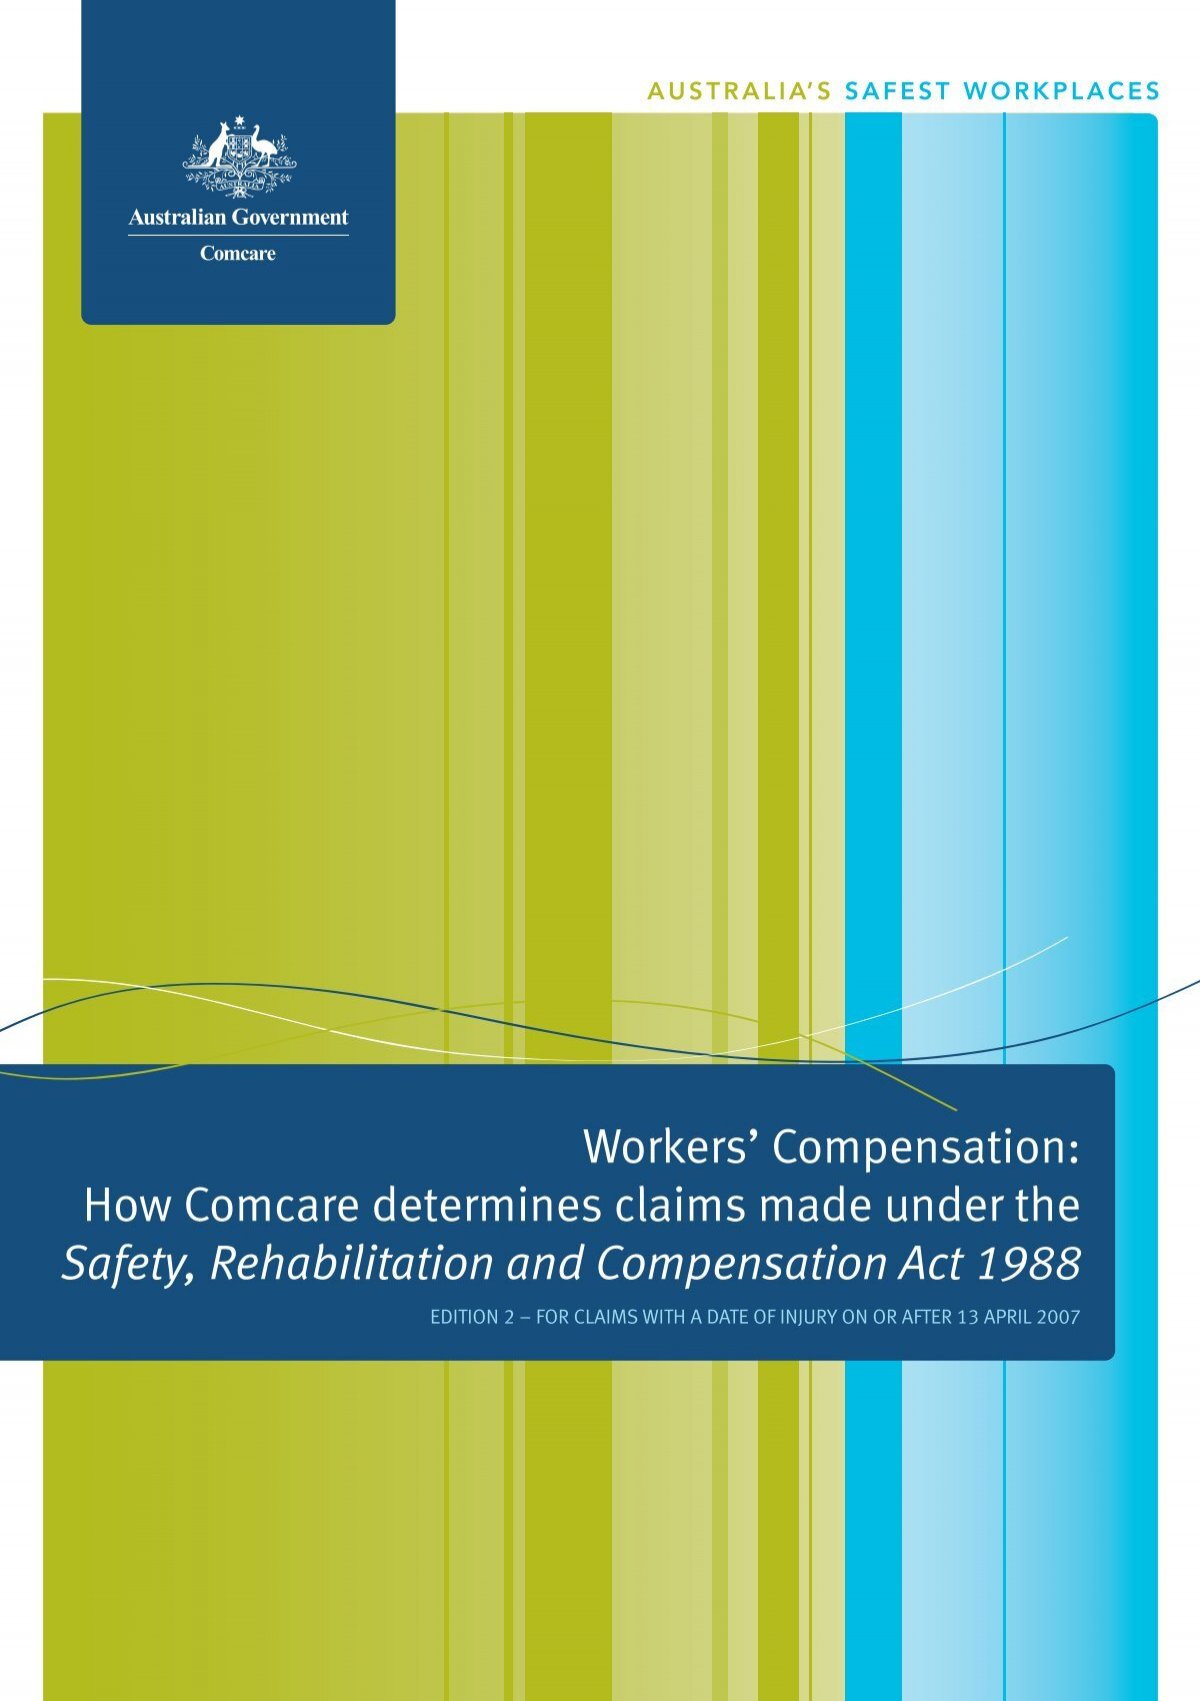 Comcare and workcover